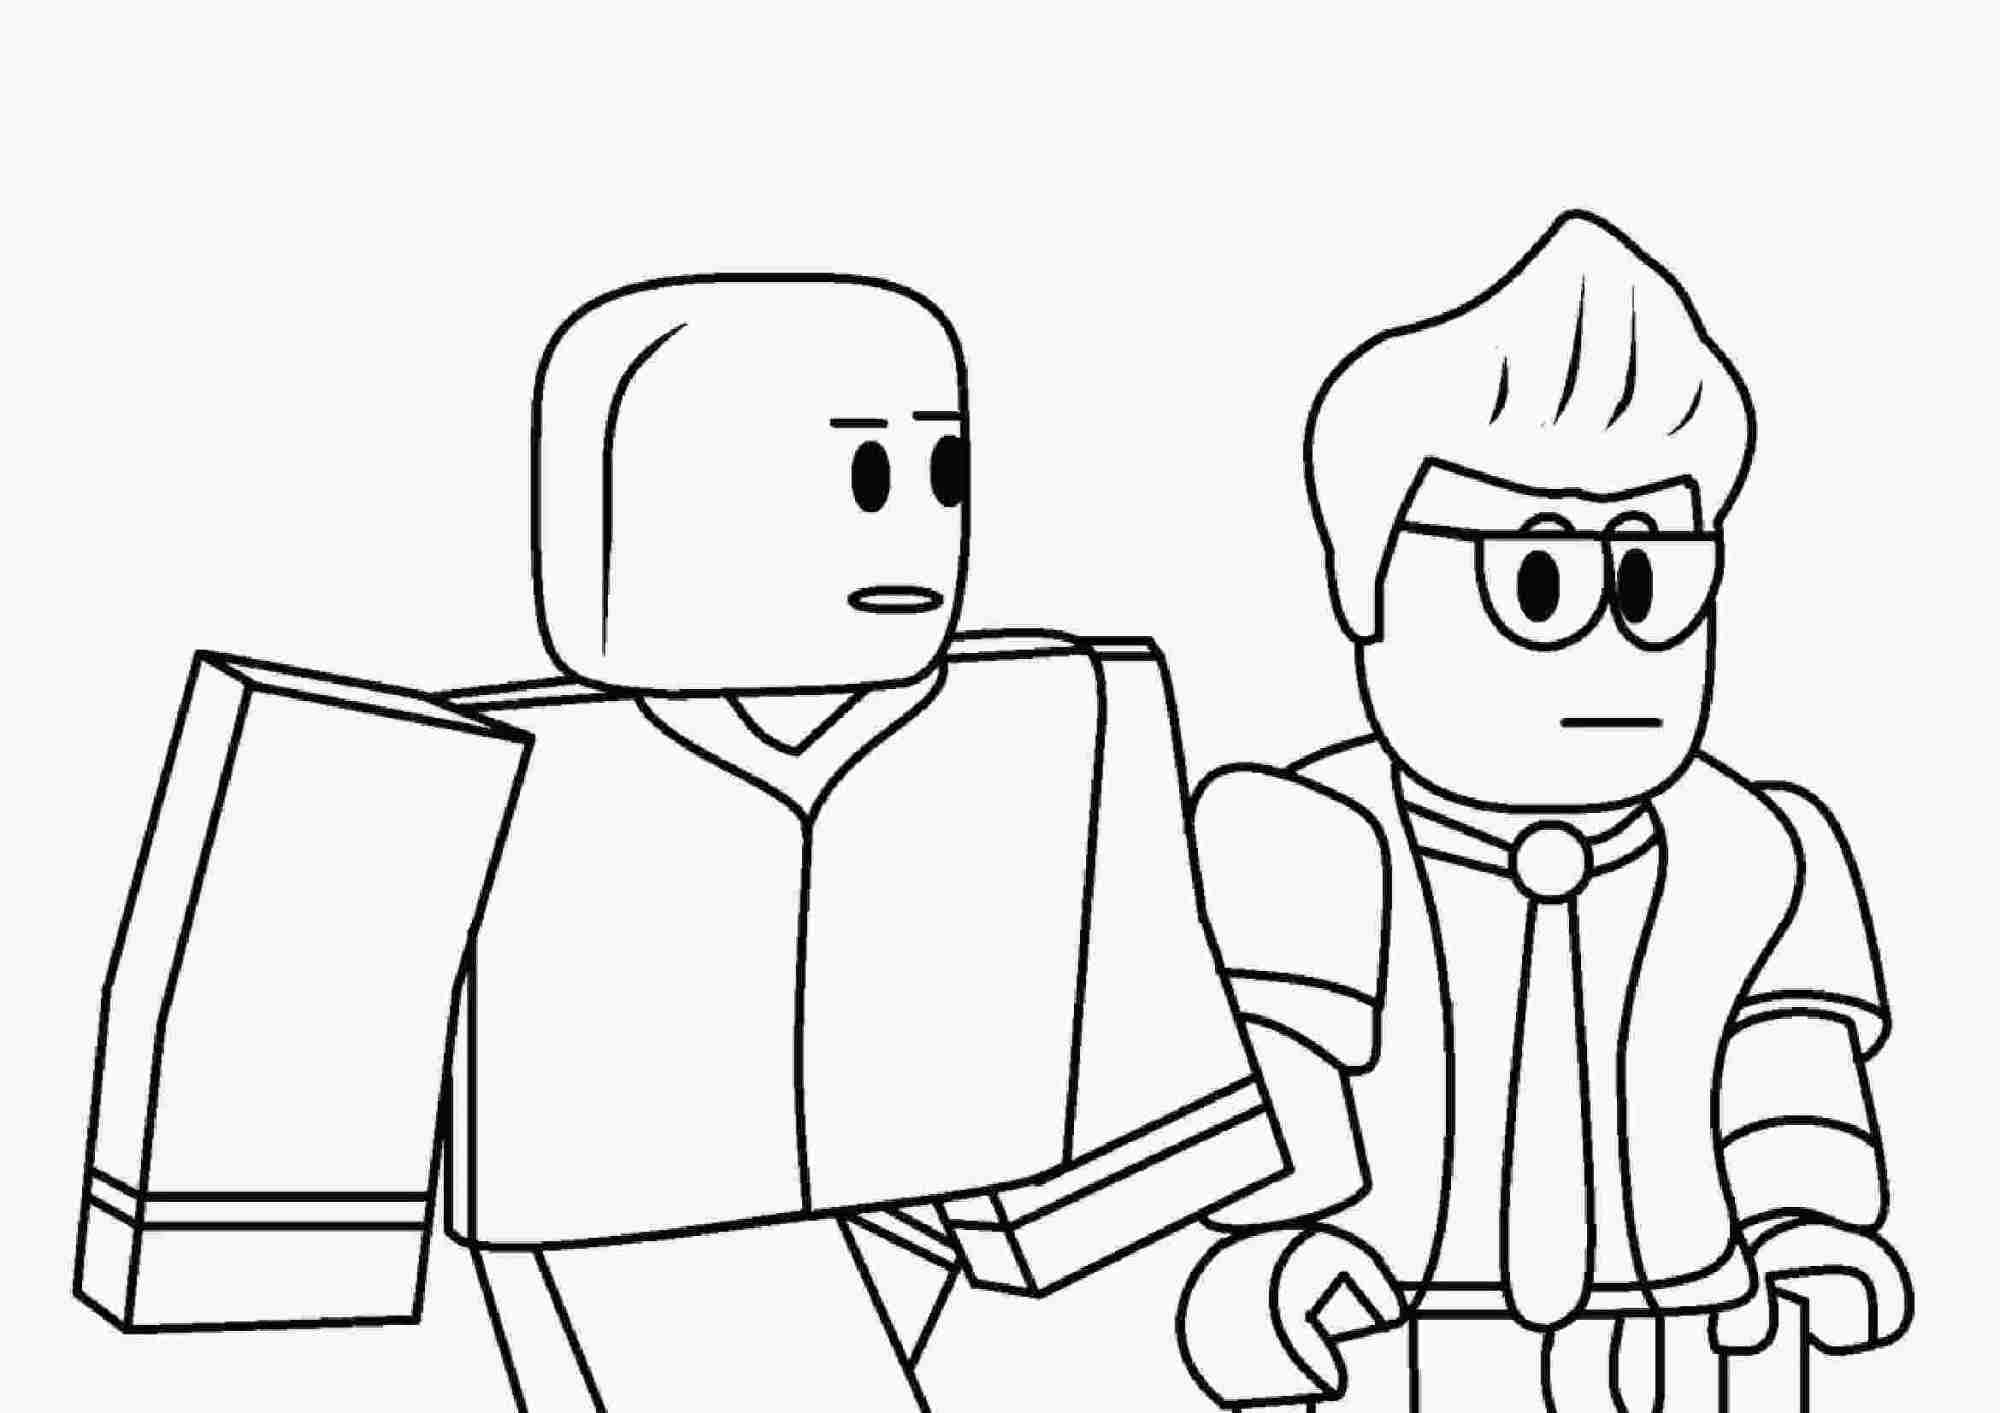 Roblox Noob and Businessman walk around Coloring Pages - Lego Coloring